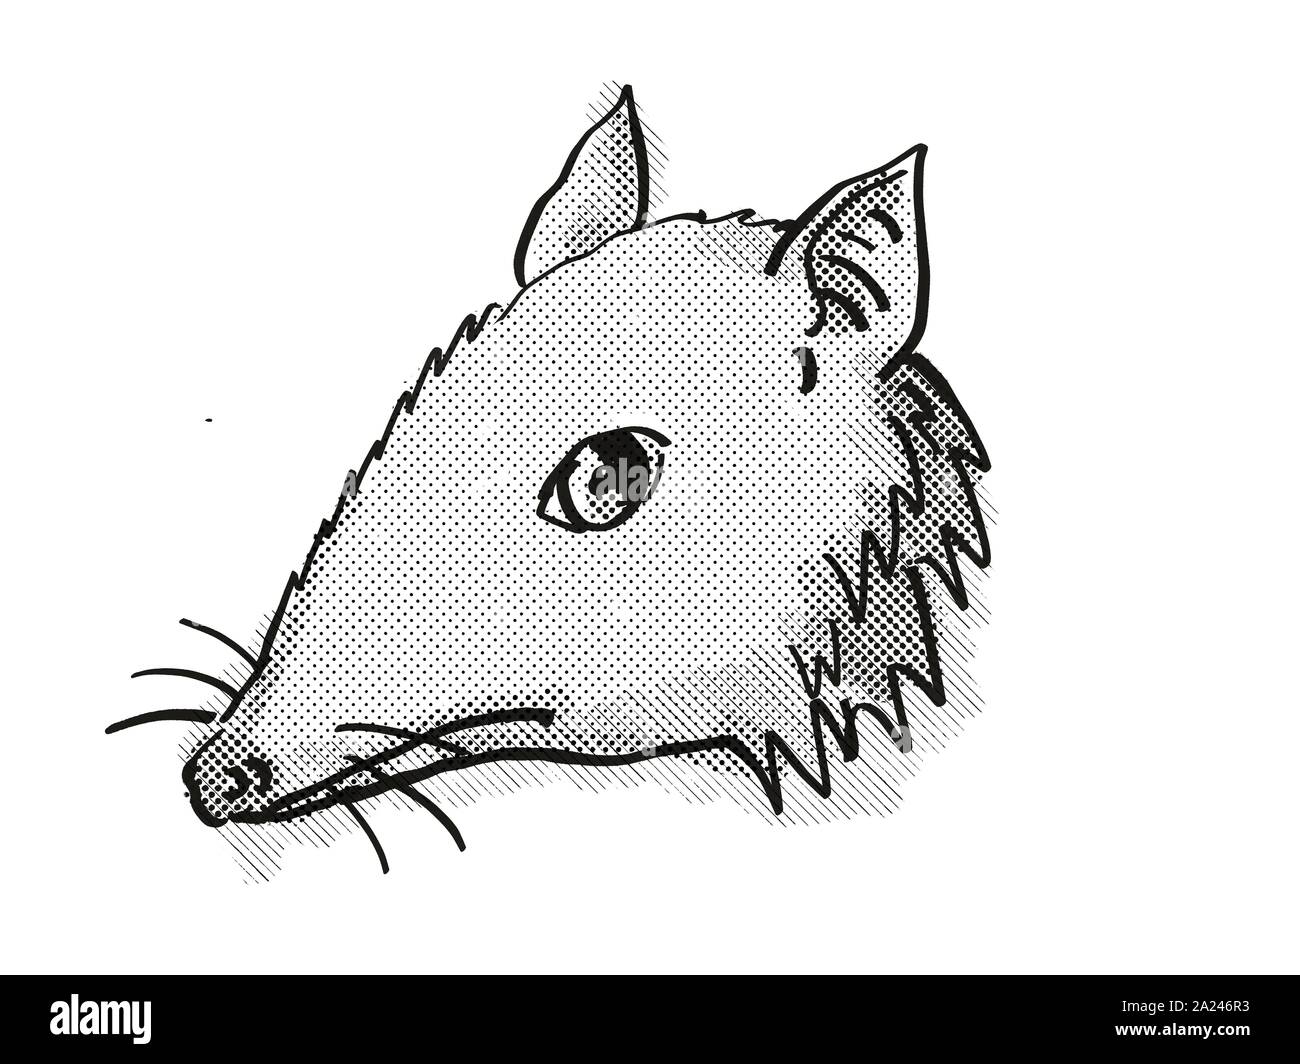 Retro cartoon style drawing of head of a Long-Nosed Bandicoot , an endangered wildlife species on isolated white background done in black and white. Stock Photo